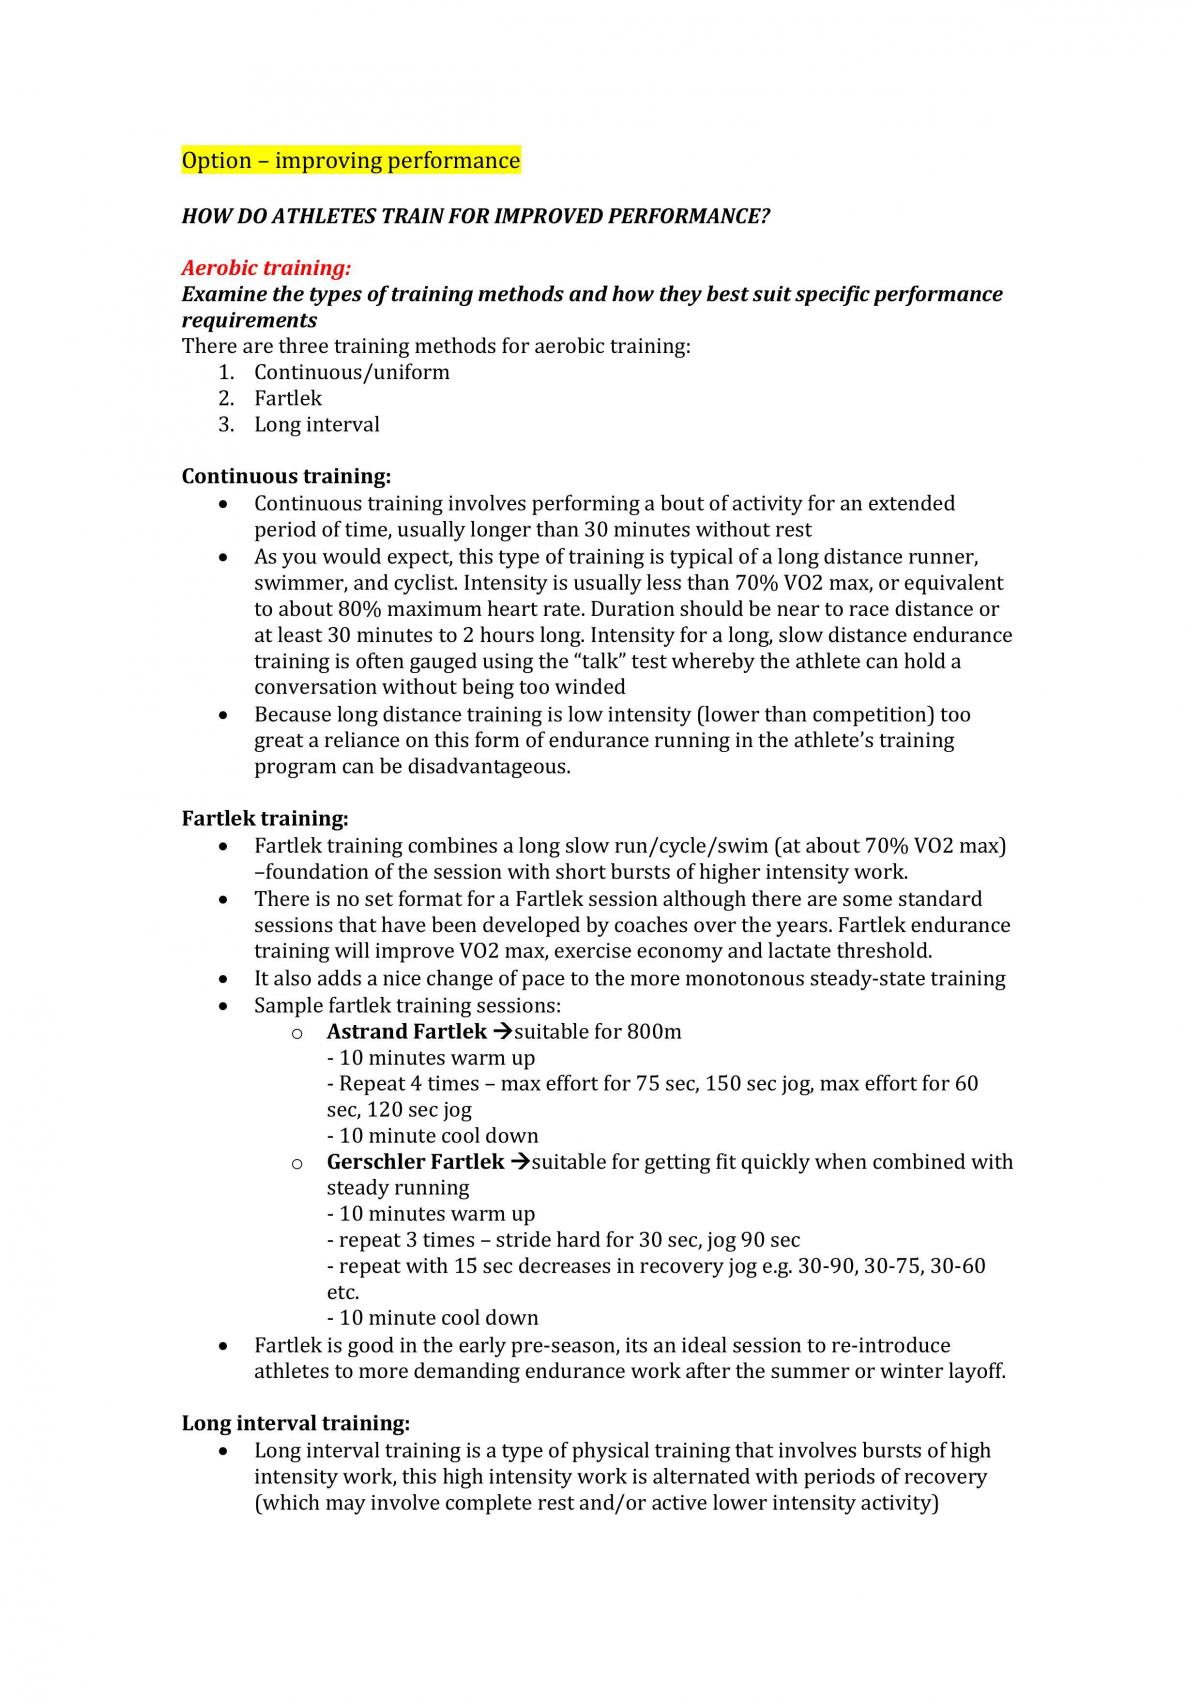 PDHPE Notes - Improving Performance  - Page 1